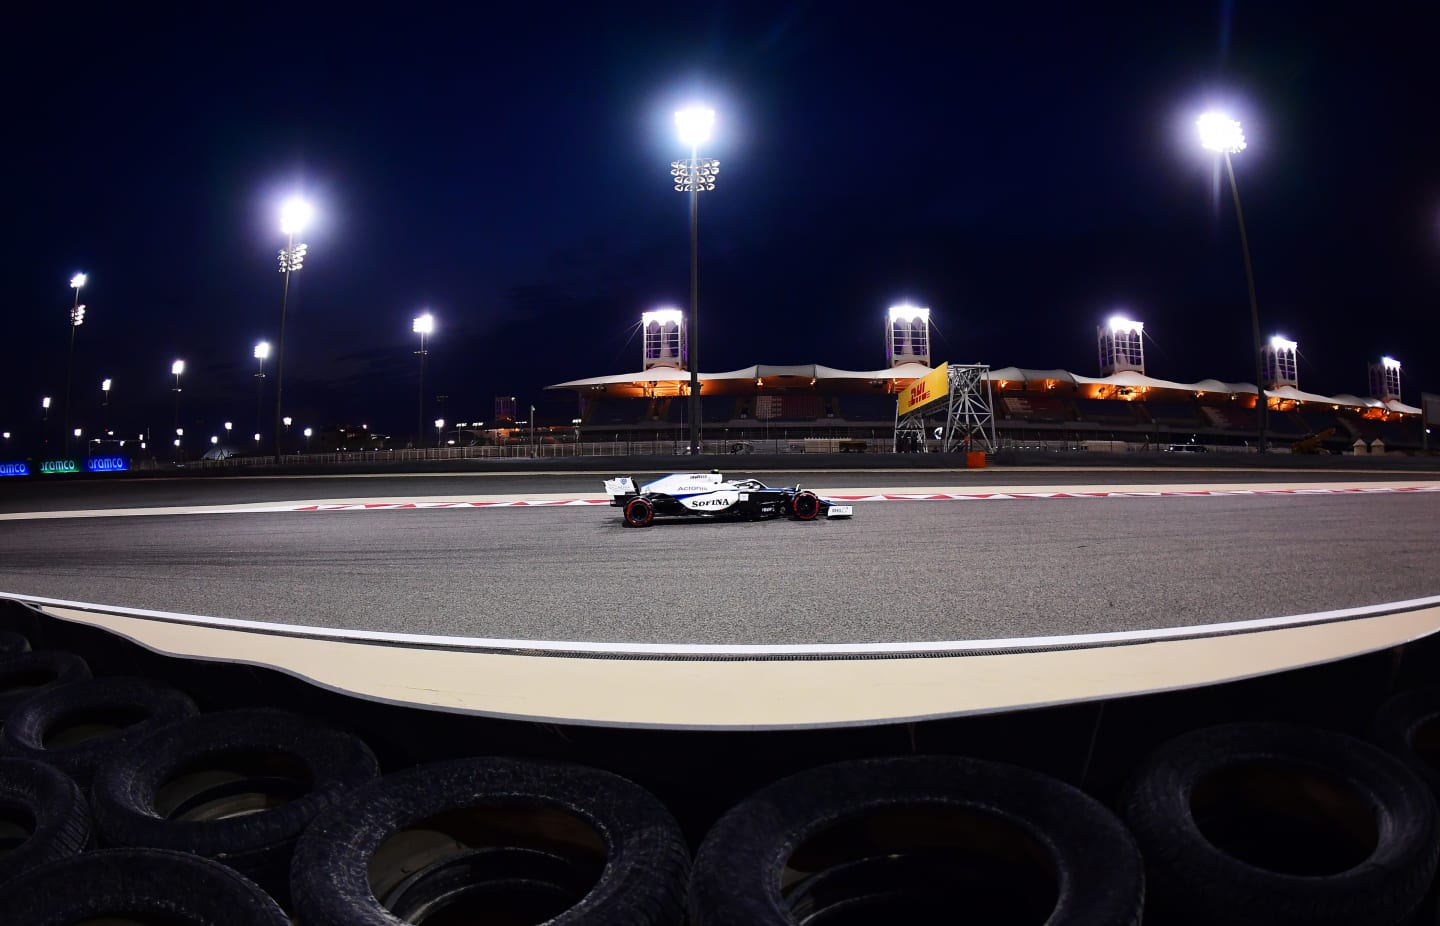 BAHRAIN, BAHRAIN - NOVEMBER 28: Nicholas Latifi of Canada driving the (6) Williams Racing FW43 Mercedes on track during qualifying ahead of the F1 Grand Prix of Bahrain at Bahrain International Circuit on November 28, 2020 in Bahrain, Bahrain. (Photo by Giuseppe Cacace - Pool/Getty Images)